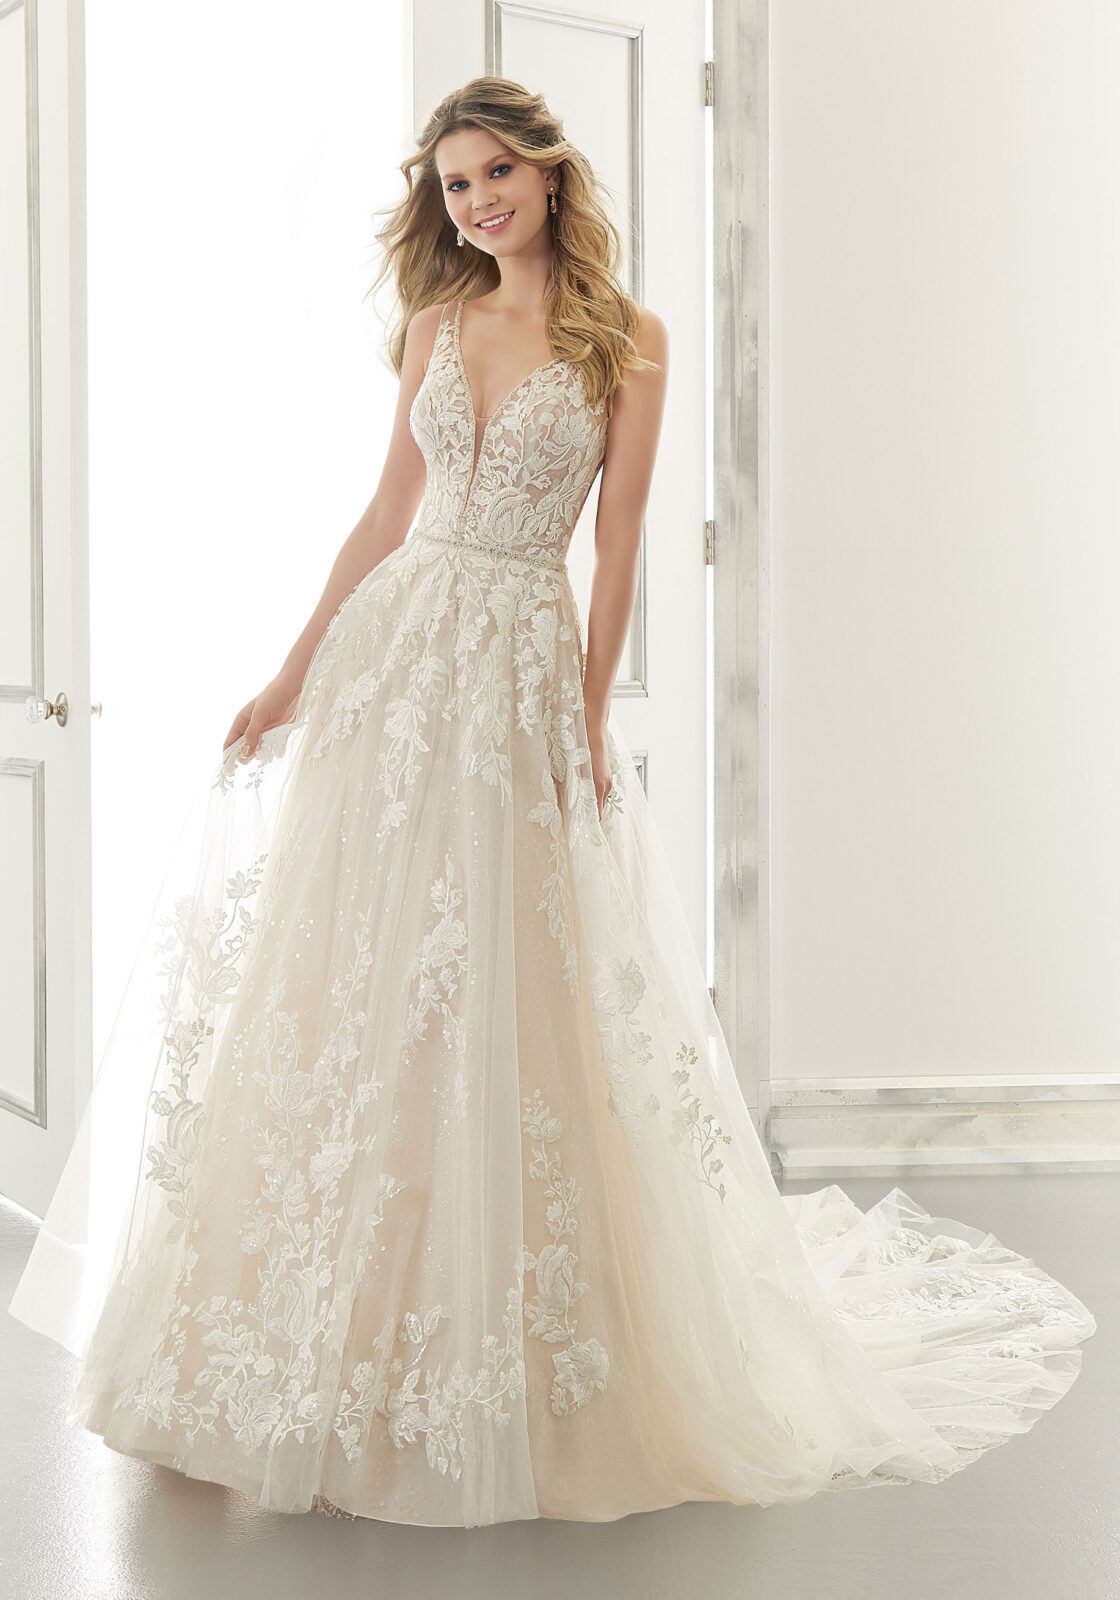 Morilee Bridal Gowns Archives - Bridal Suite of Bay Shore